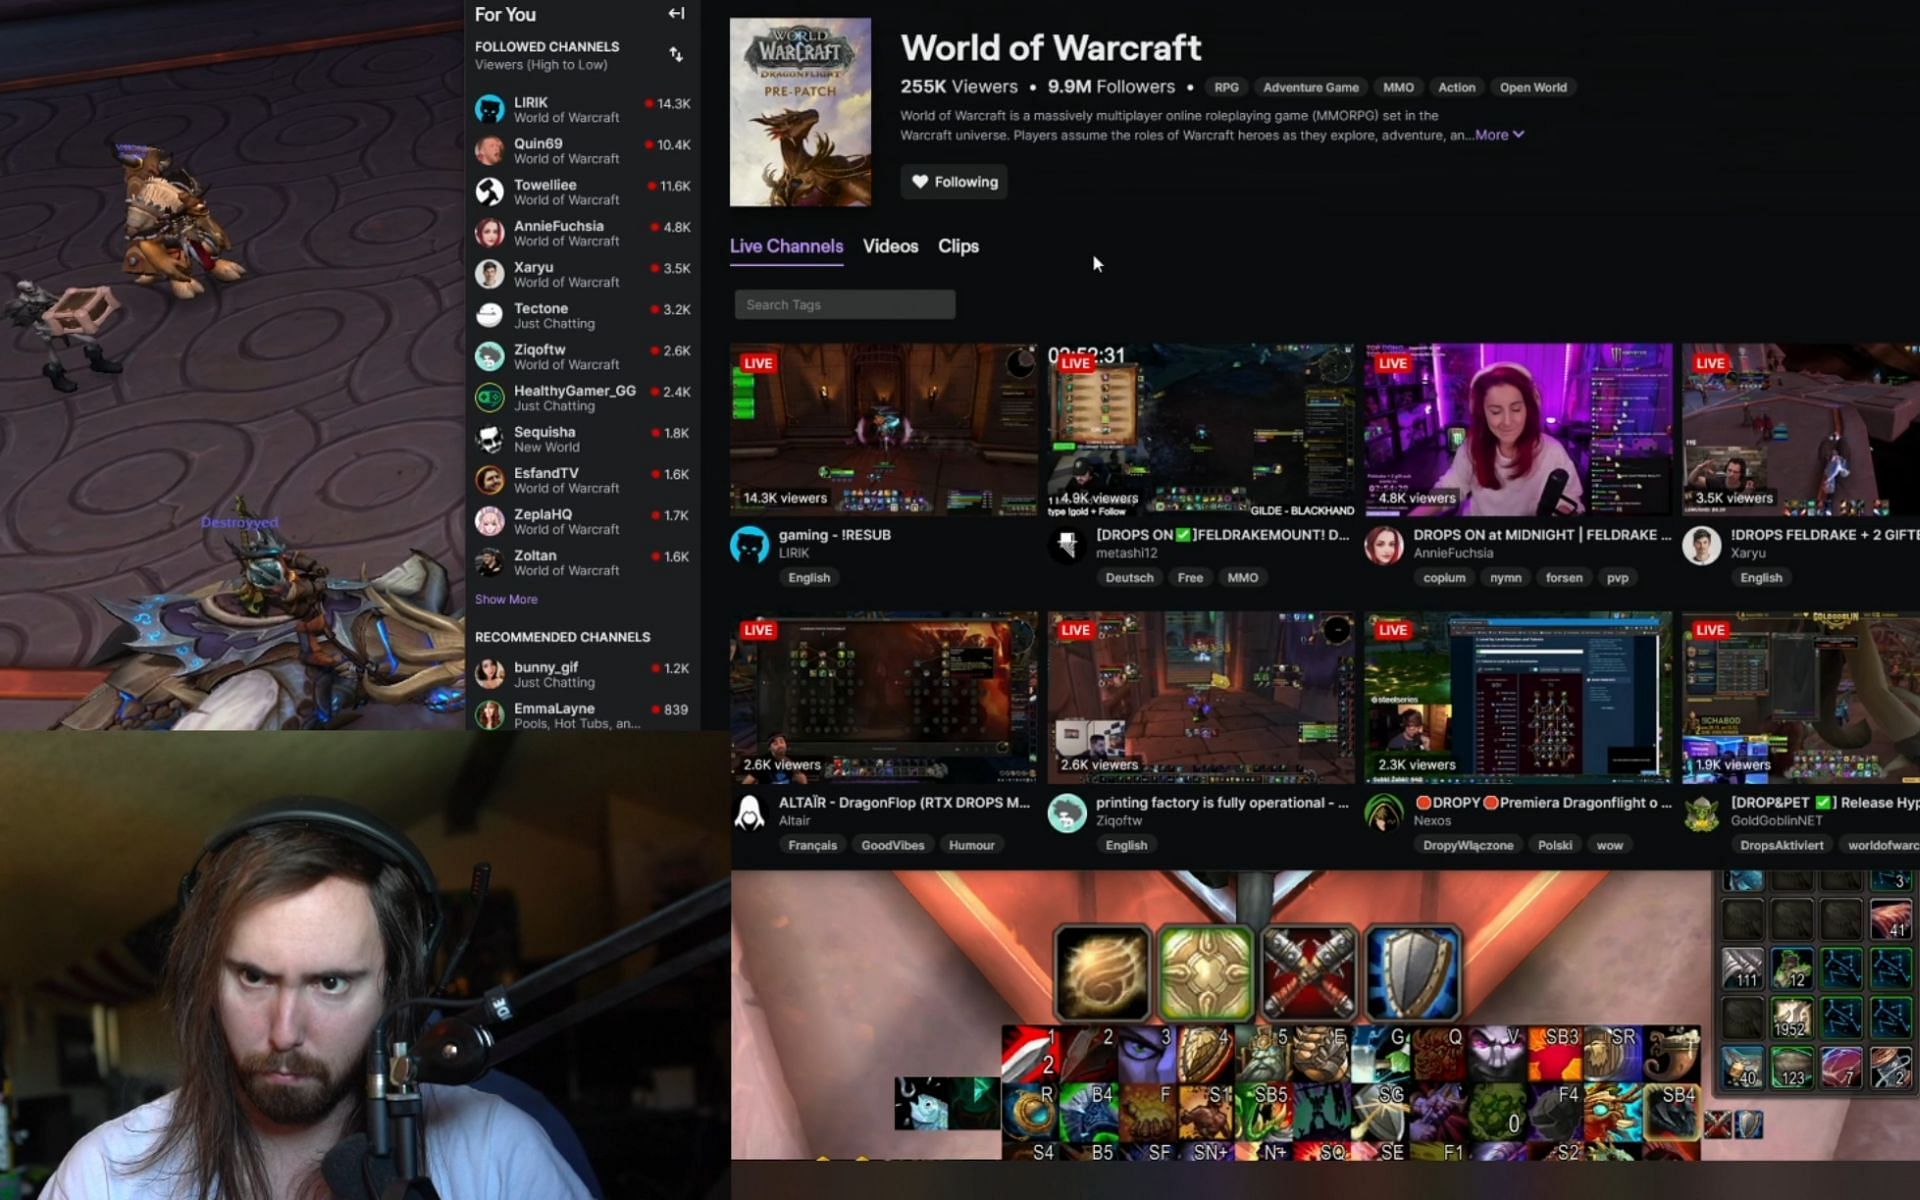 Asmongold reacts after seeing his channel not appear in the World of Warcraft category on Twitch (Image via Asmongold/Twitch)